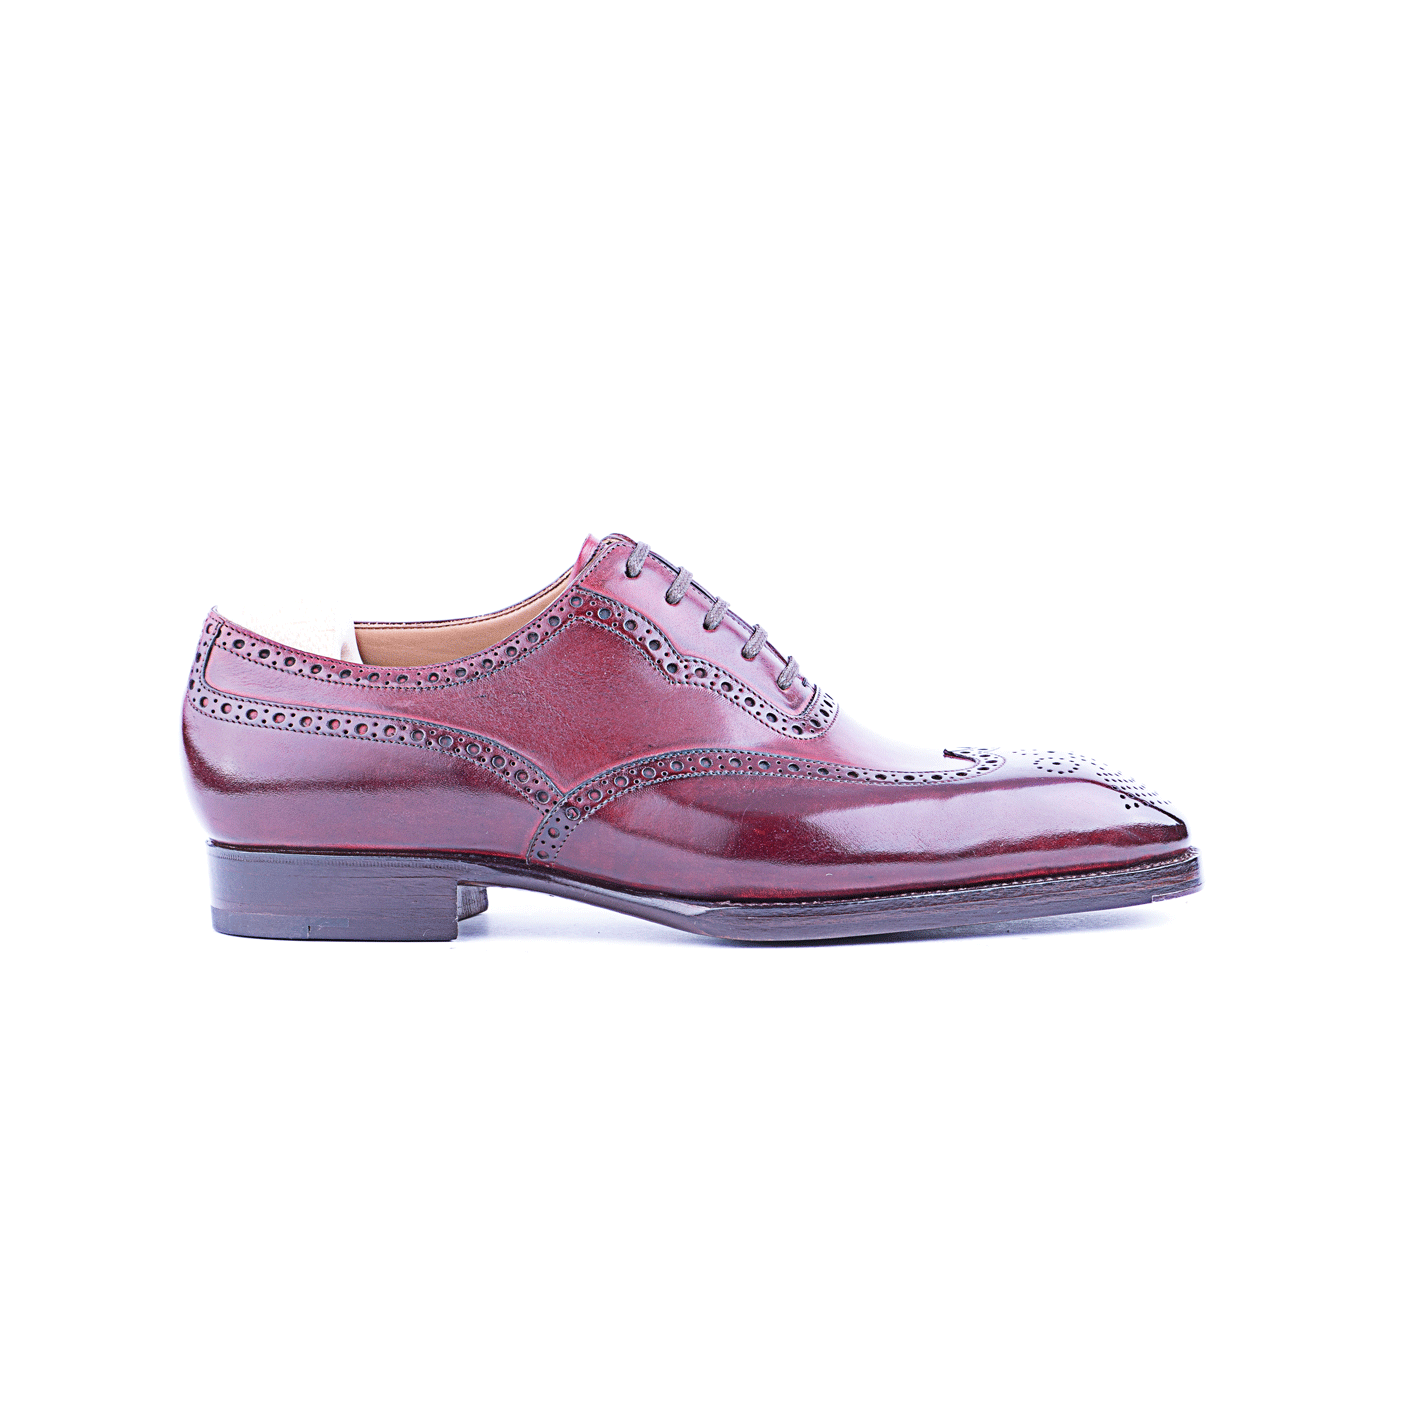 Long wing full brogued Oxford